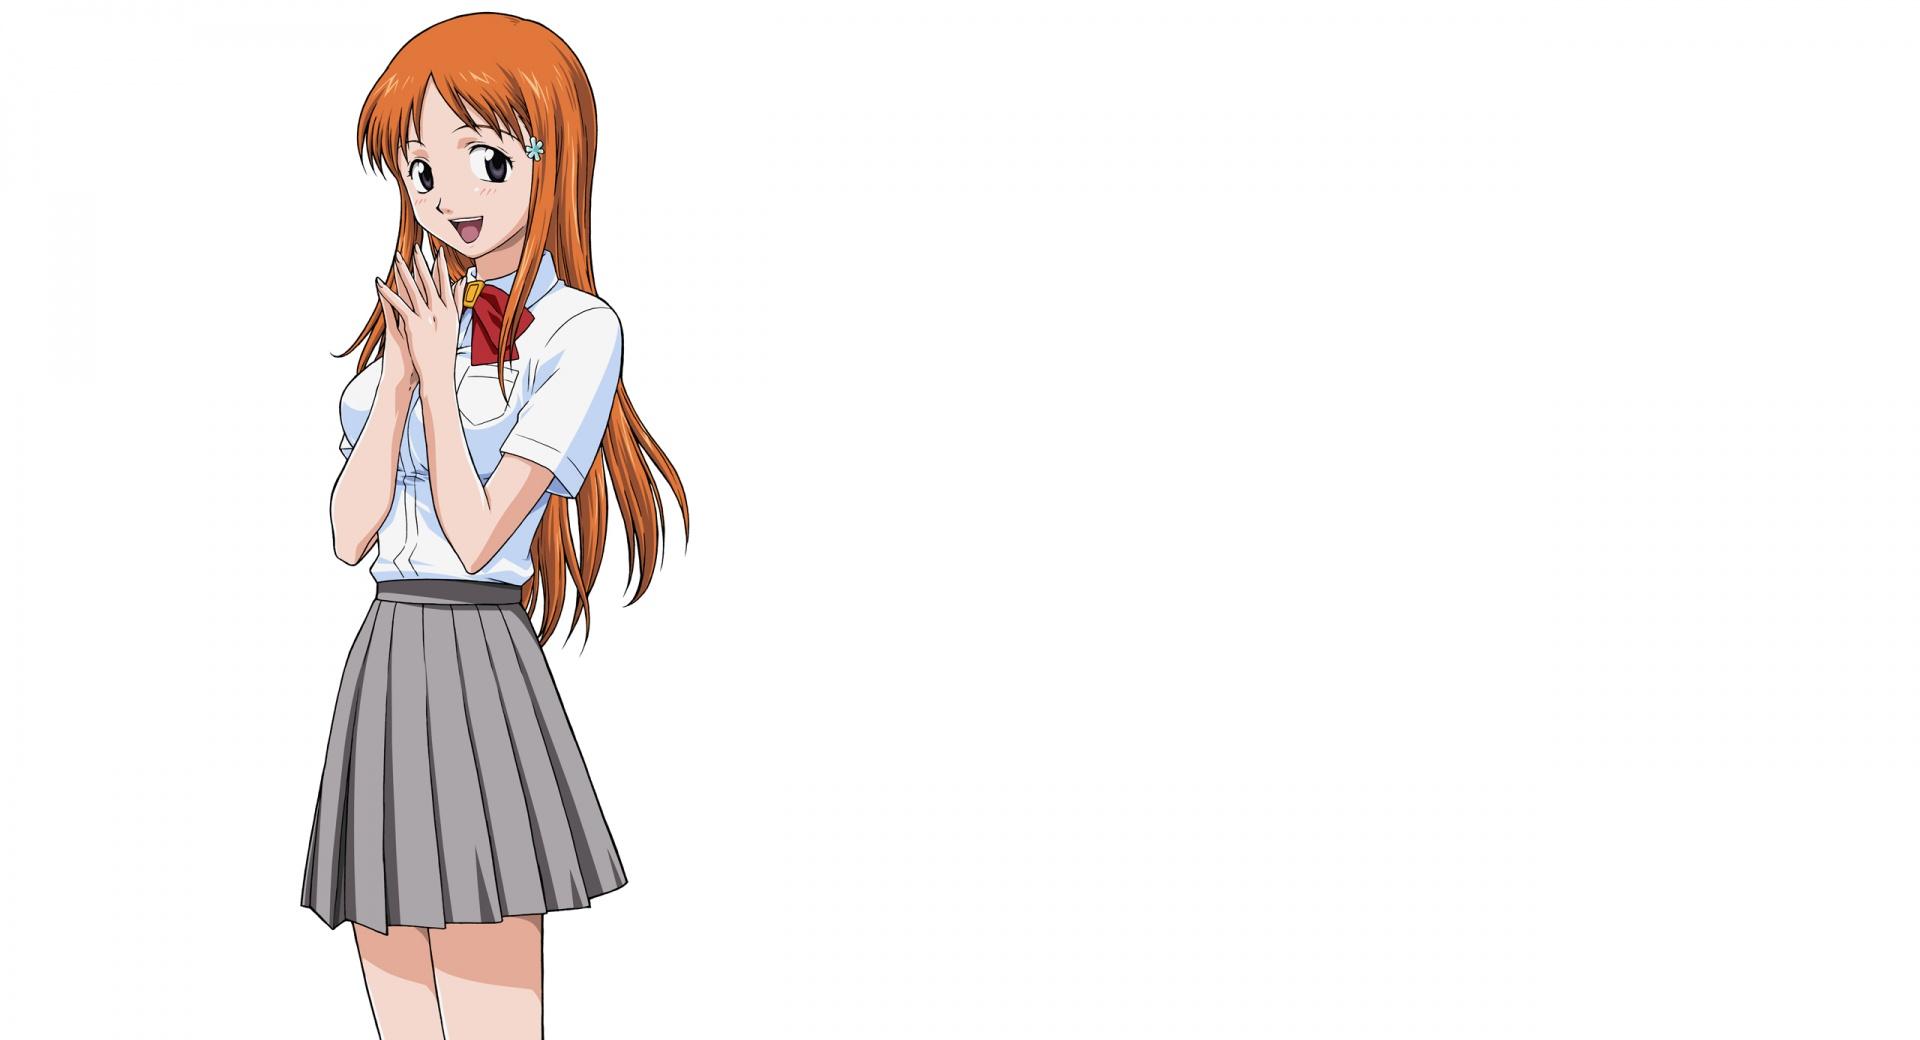 Anime Girl With Orange Hair wallpapers HD quality